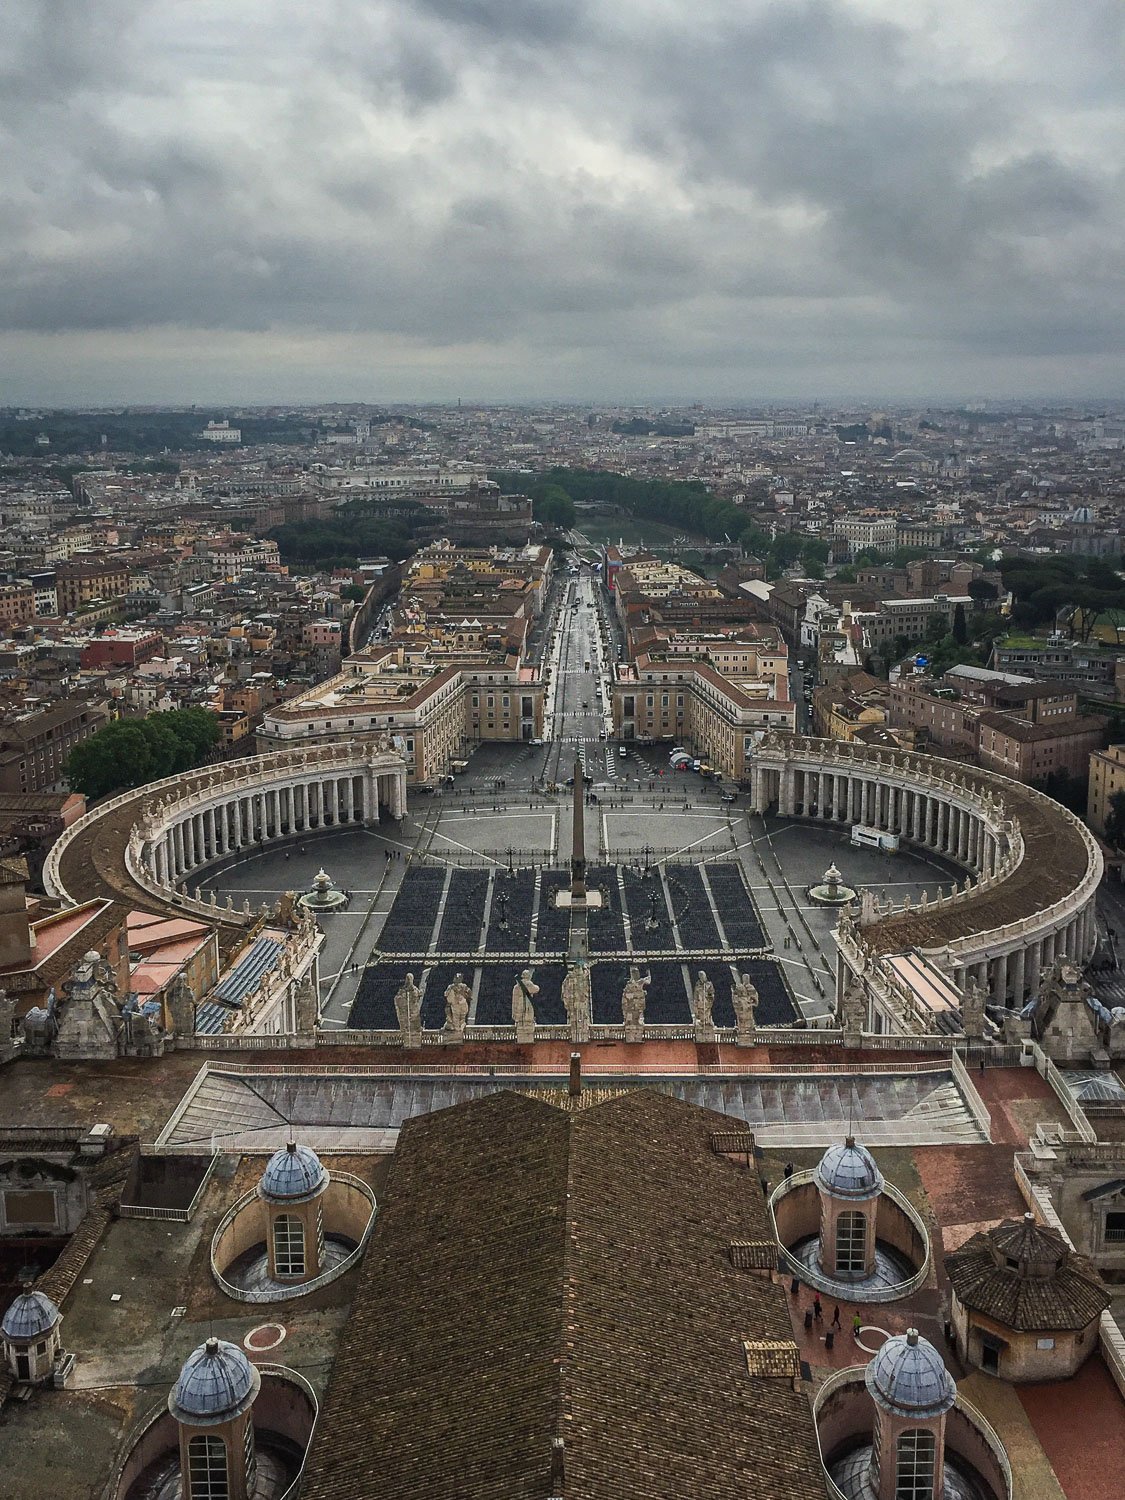 Vatican And St. Peter's Basilica - City View